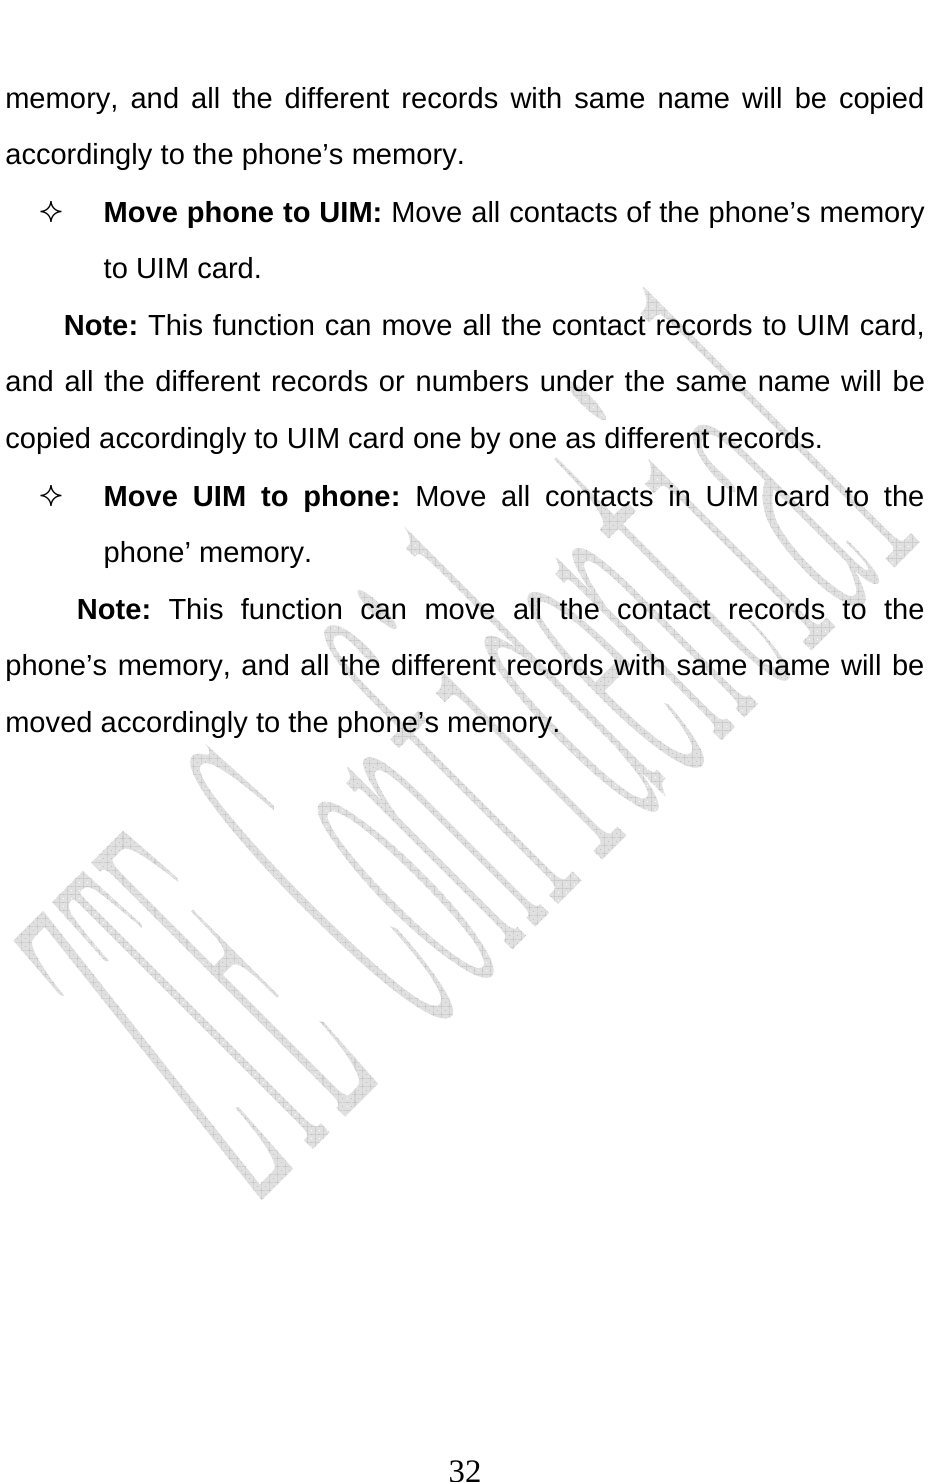                              32memory, and all the different records with same name will be copied accordingly to the phone’s memory.  Move phone to UIM: Move all contacts of the phone’s memory to UIM card.   Note: This function can move all the contact records to UIM card, and all the different records or numbers under the same name will be copied accordingly to UIM card one by one as different records.    Move UIM to phone: Move all contacts in UIM card to the phone’ memory. Note: This function can move all the contact records to the phone’s memory, and all the different records with same name will be moved accordingly to the phone’s memory. 